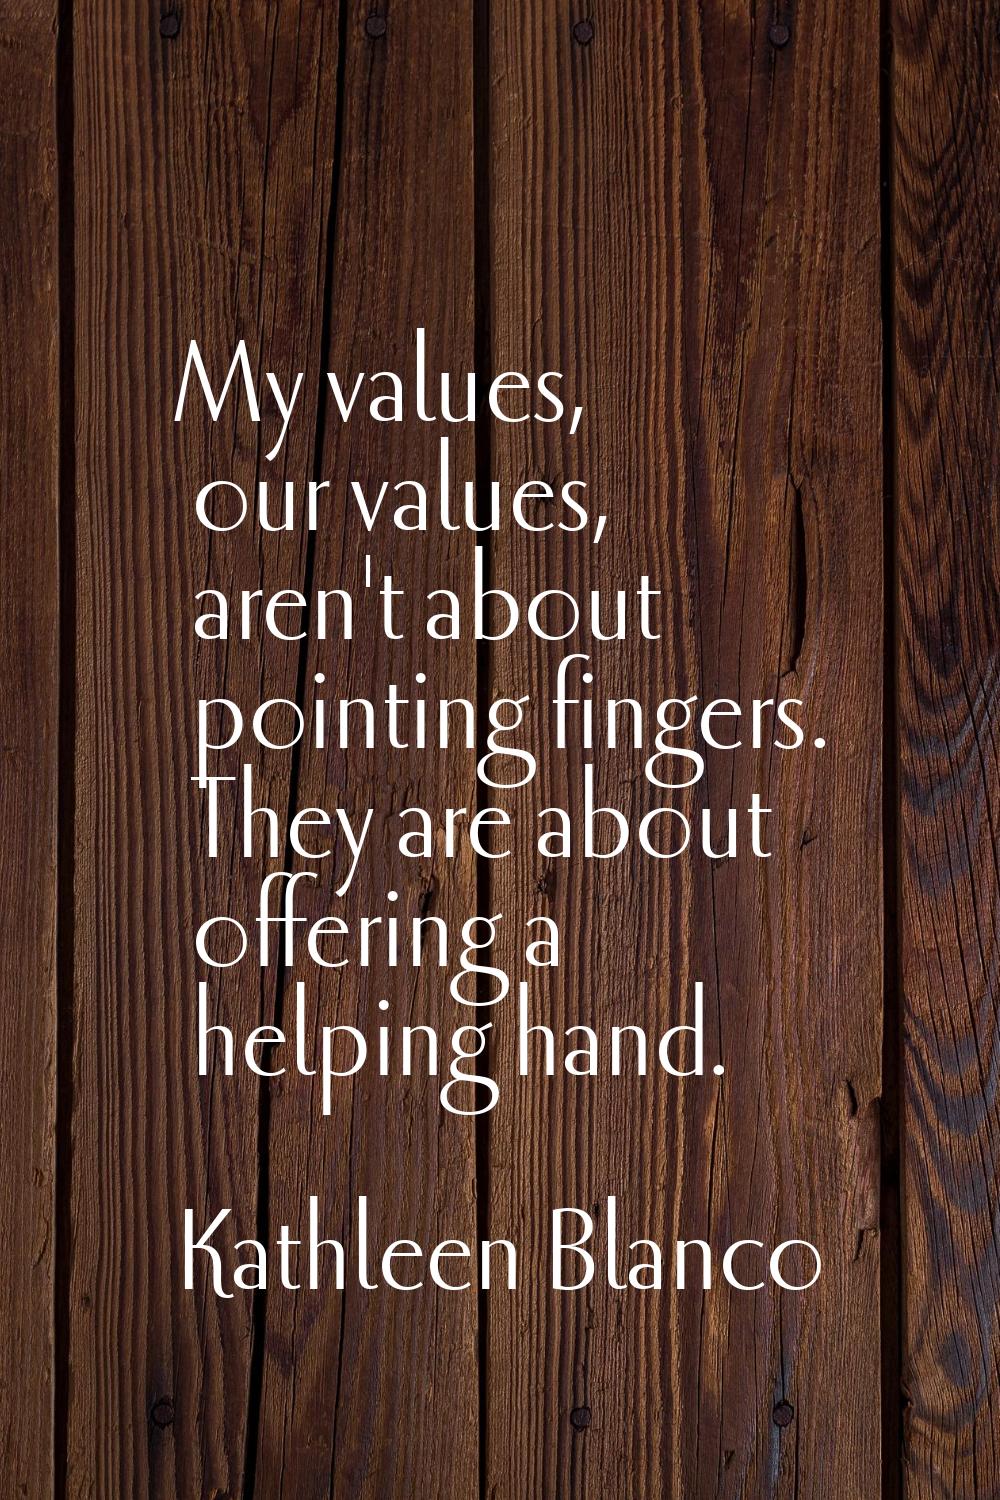 My values, our values, aren't about pointing fingers. They are about offering a helping hand.